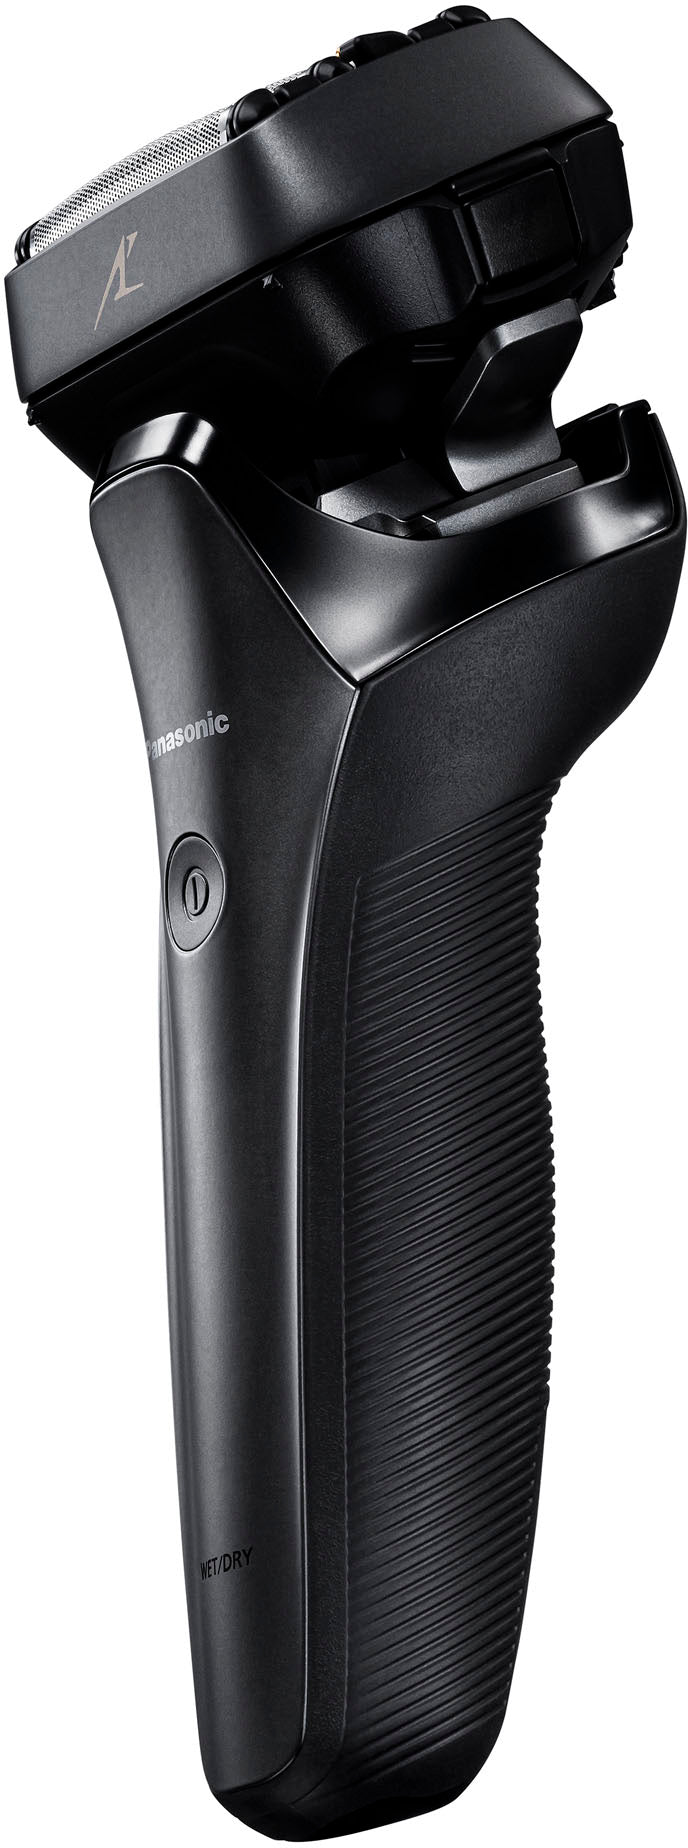 Panasonic - Arc6 Six-Blade Wet/Dry Electric Shaver with Automatic Cleaning and Charging Station - Black_1